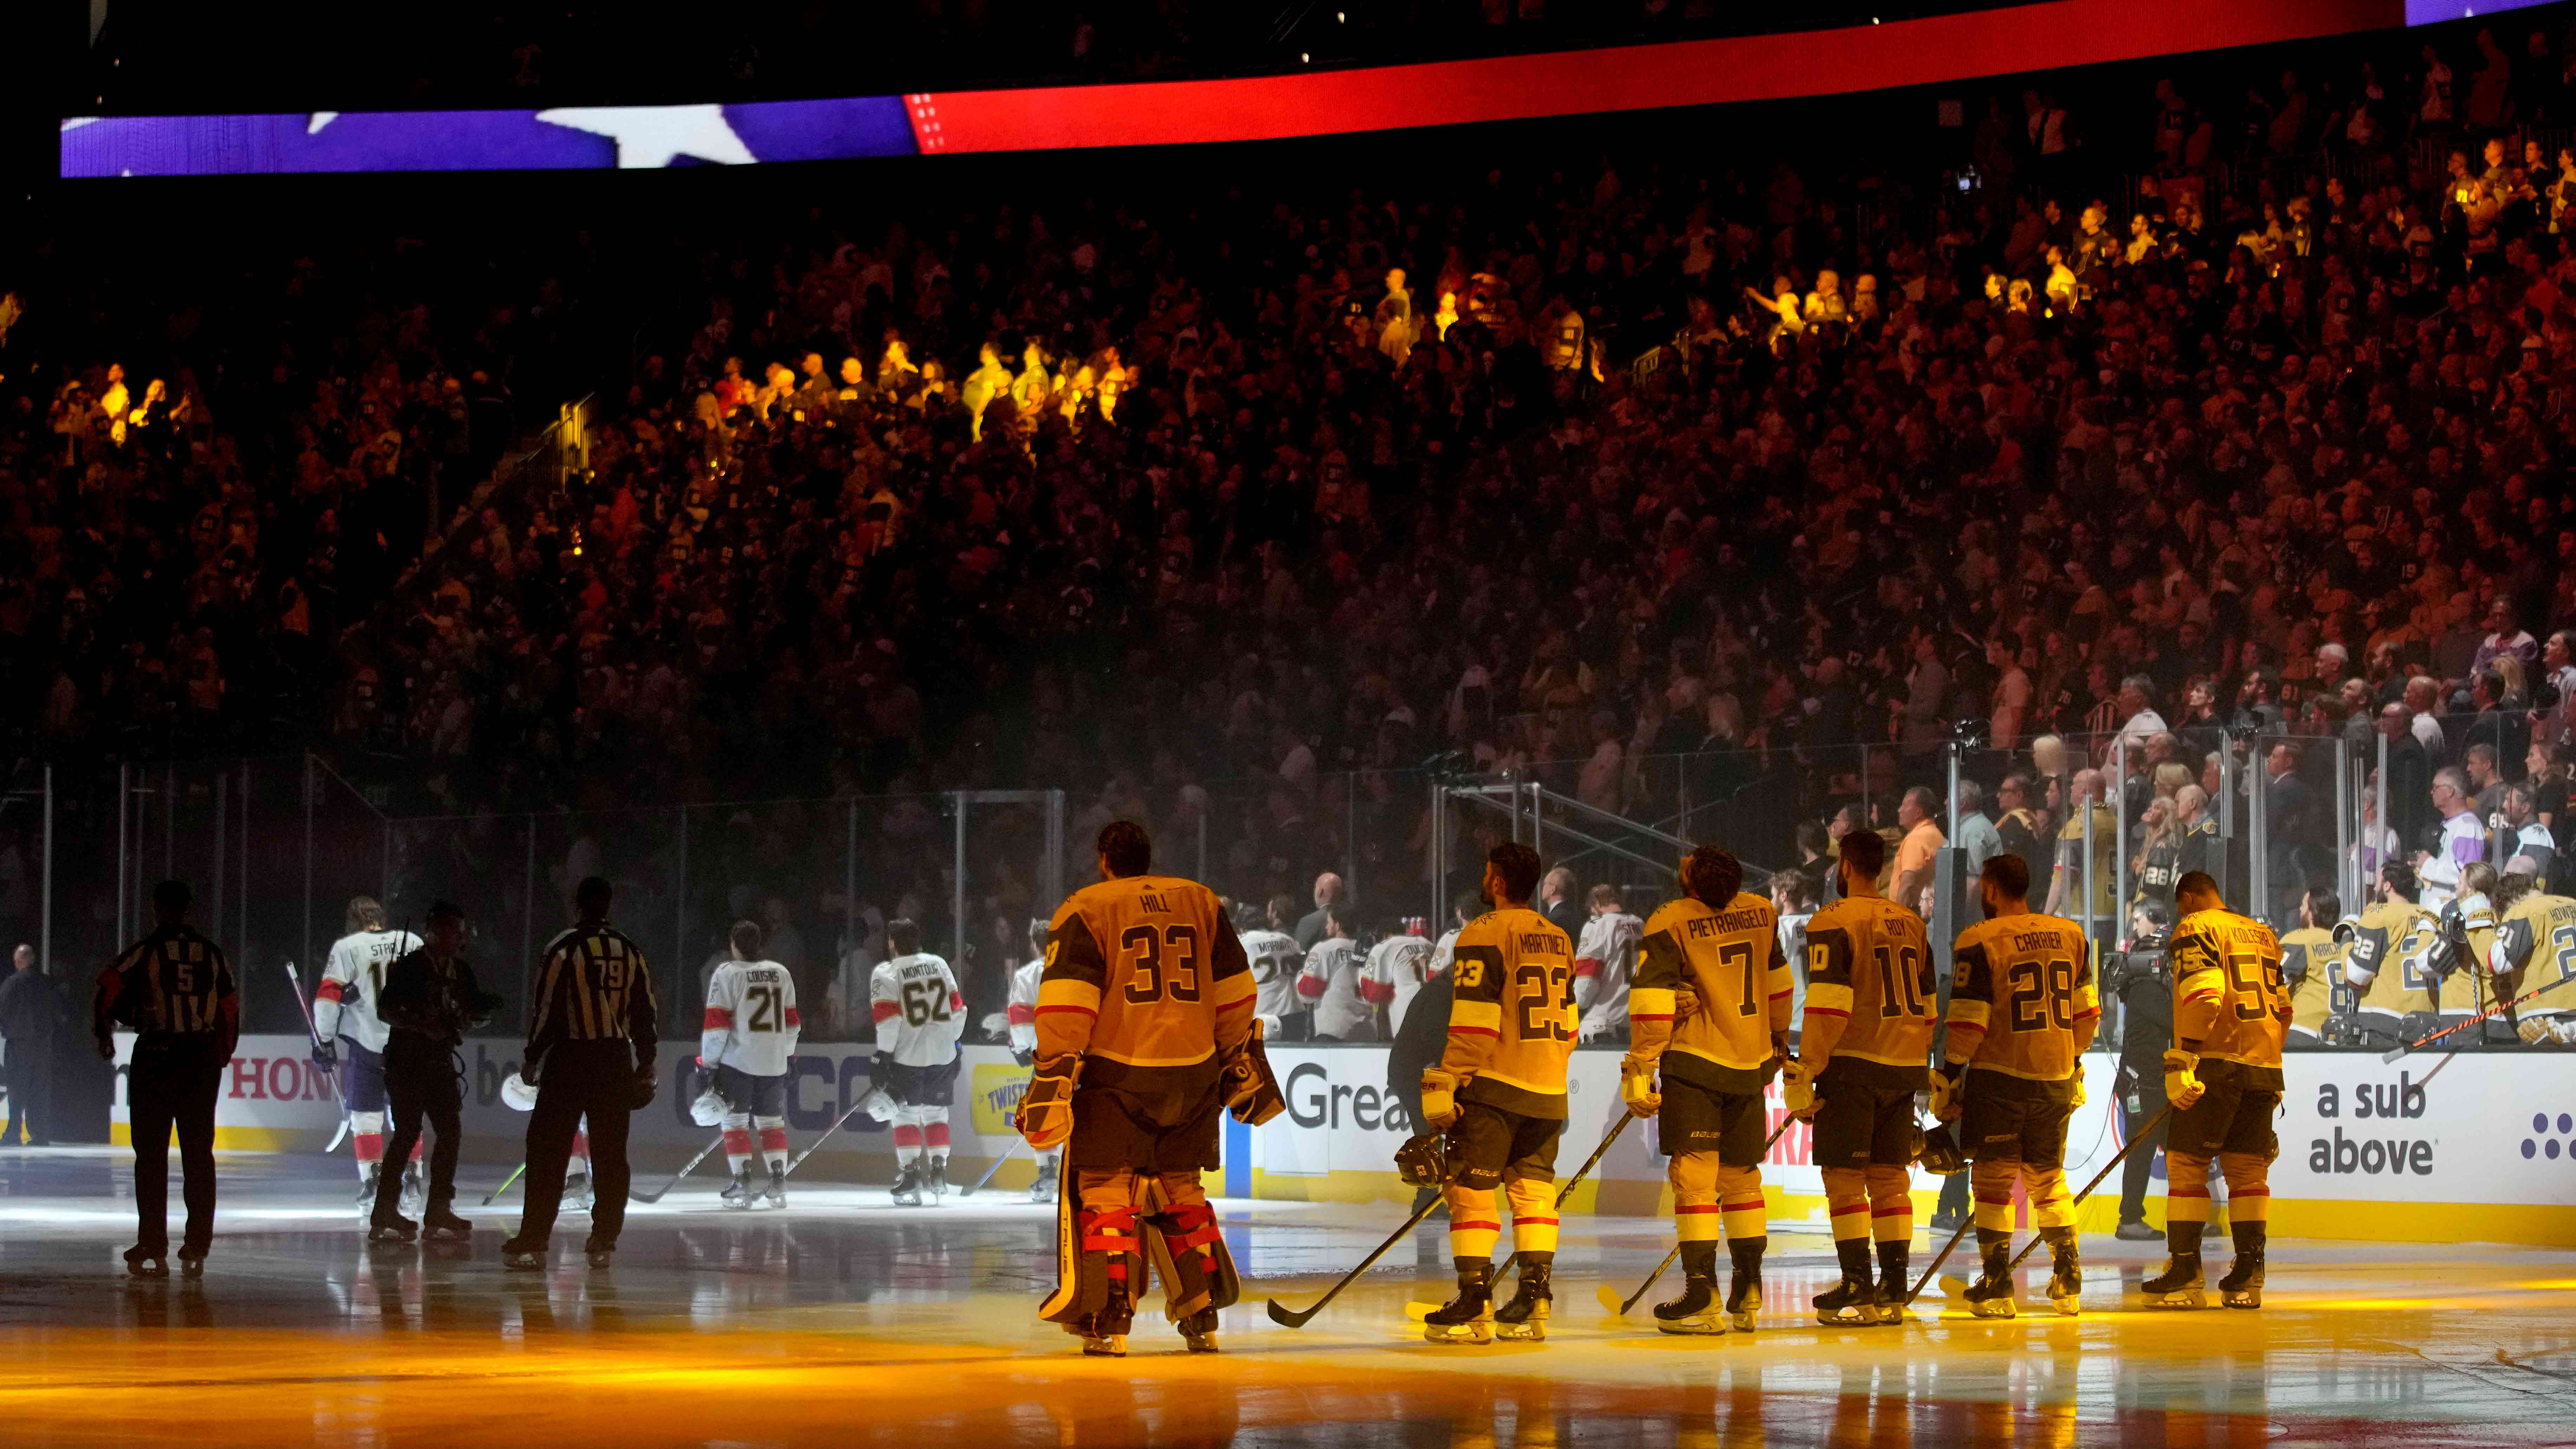 2023 Stanley Cup Final: 4 Takeaways from Golden Knights-Panthers